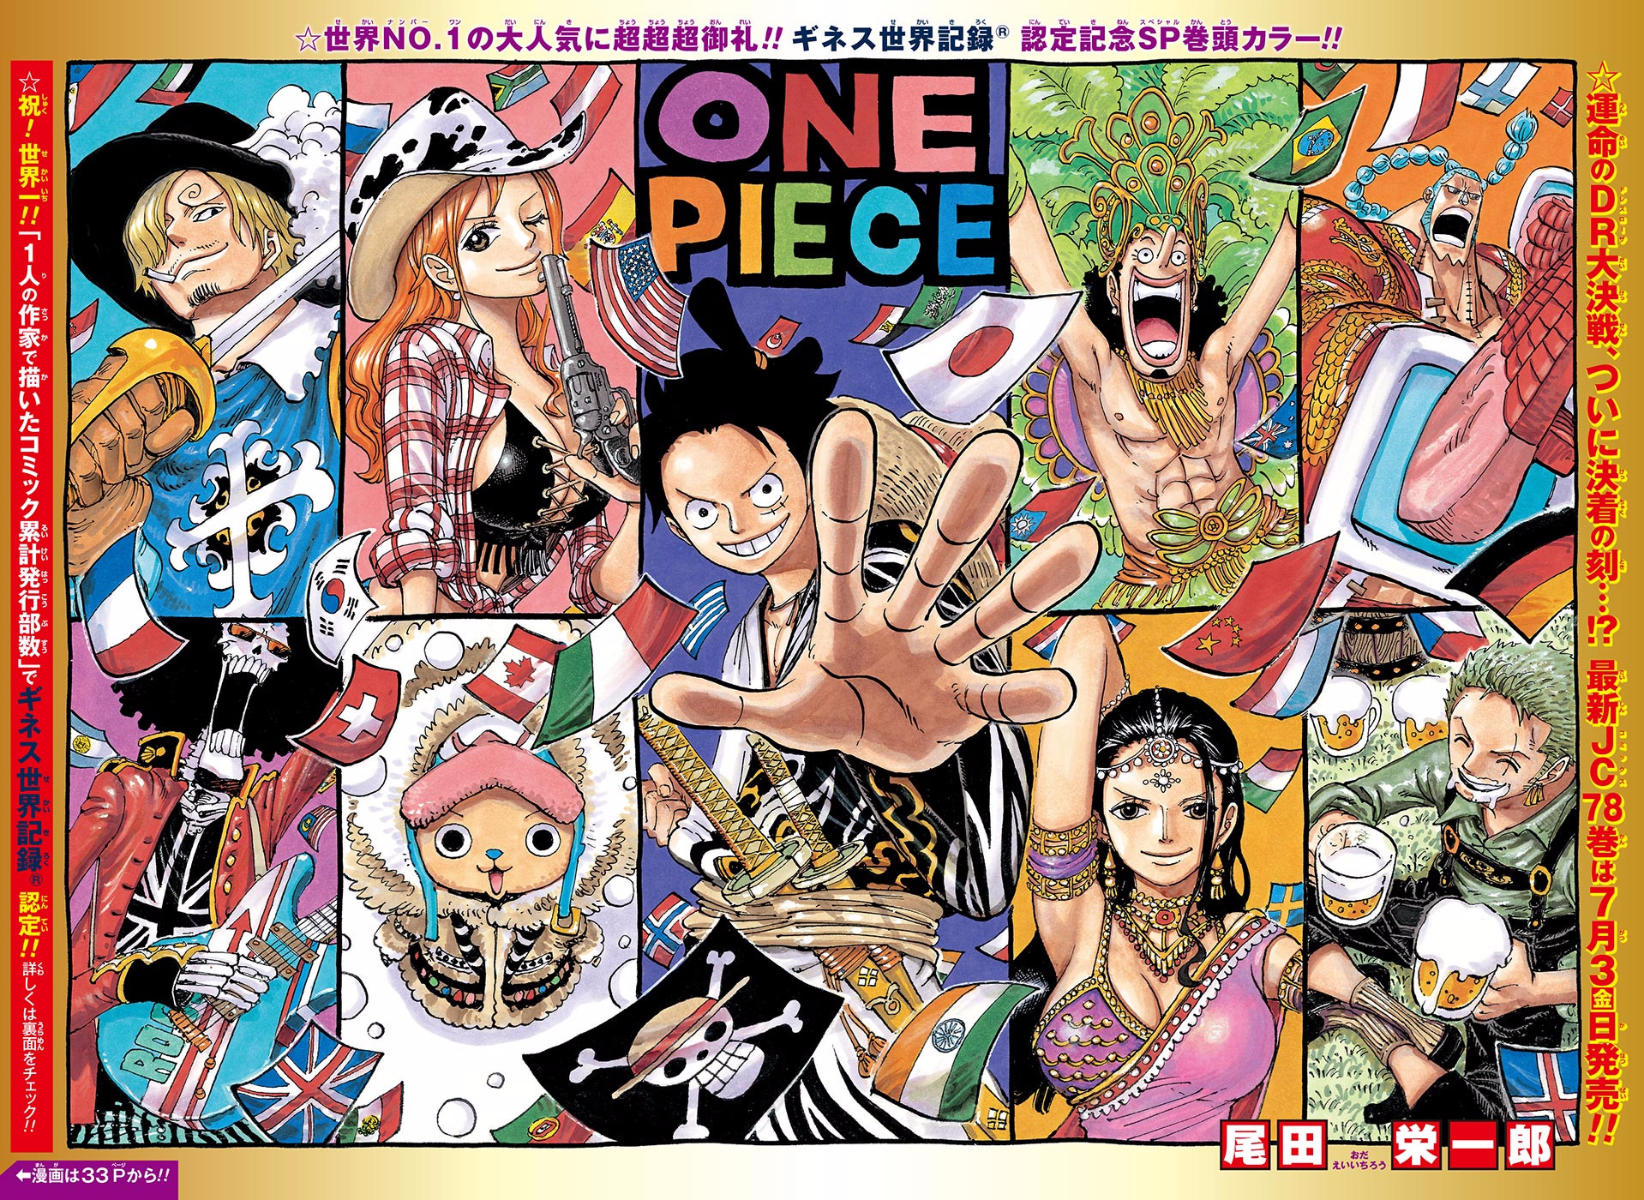 Exactly 25 years ago, Chapter 1 of One Piece was released